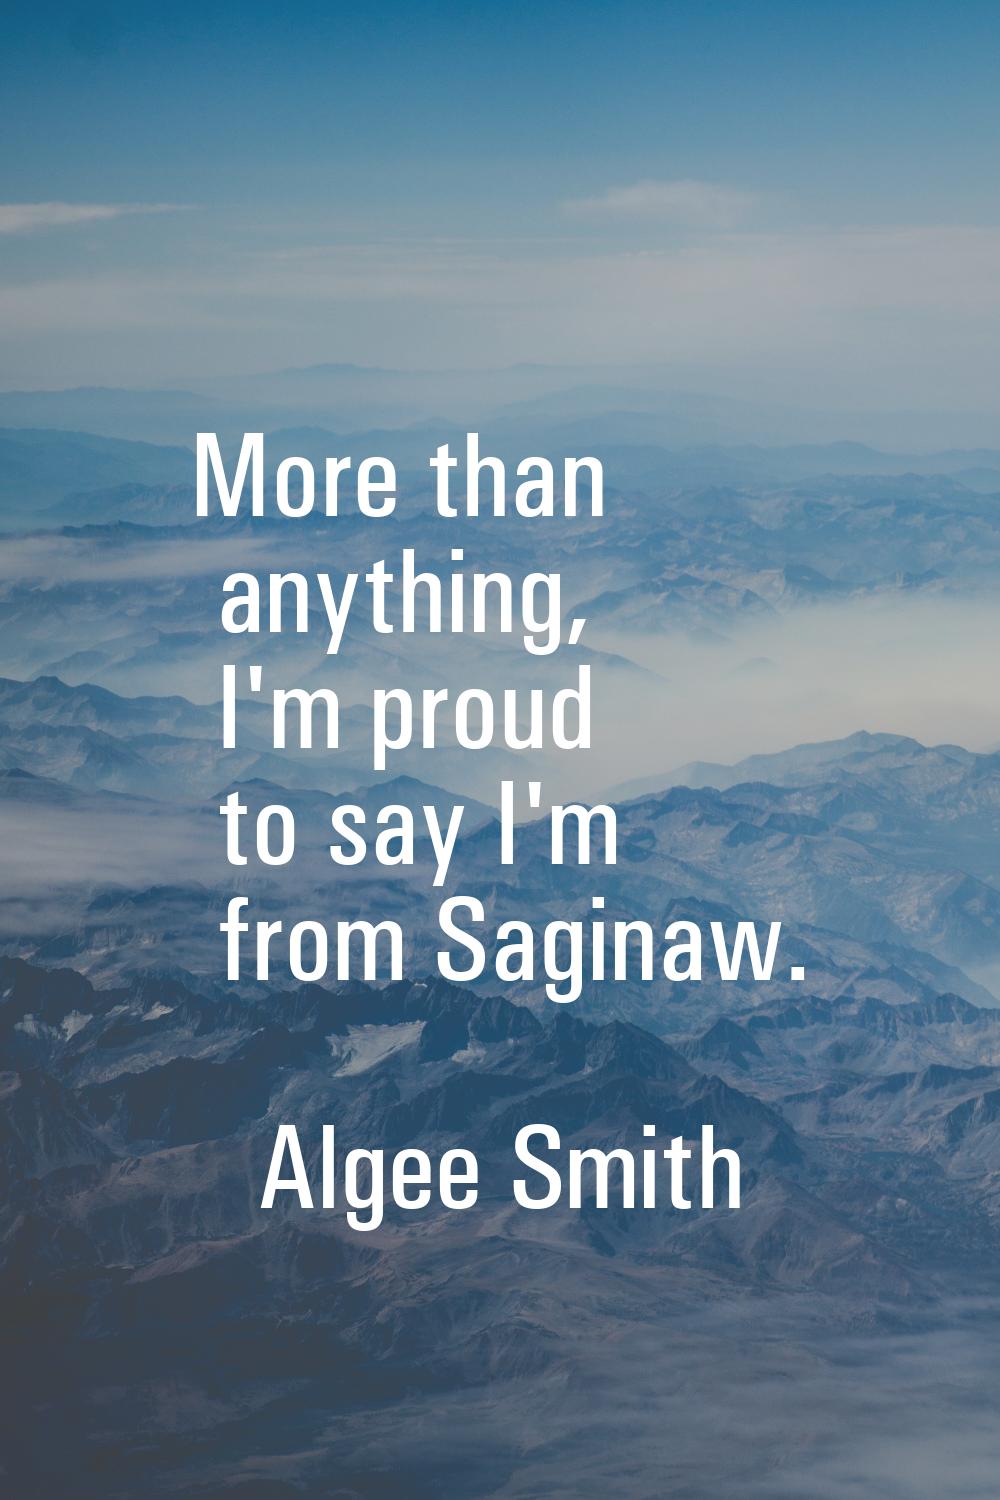 More than anything, I'm proud to say I'm from Saginaw.